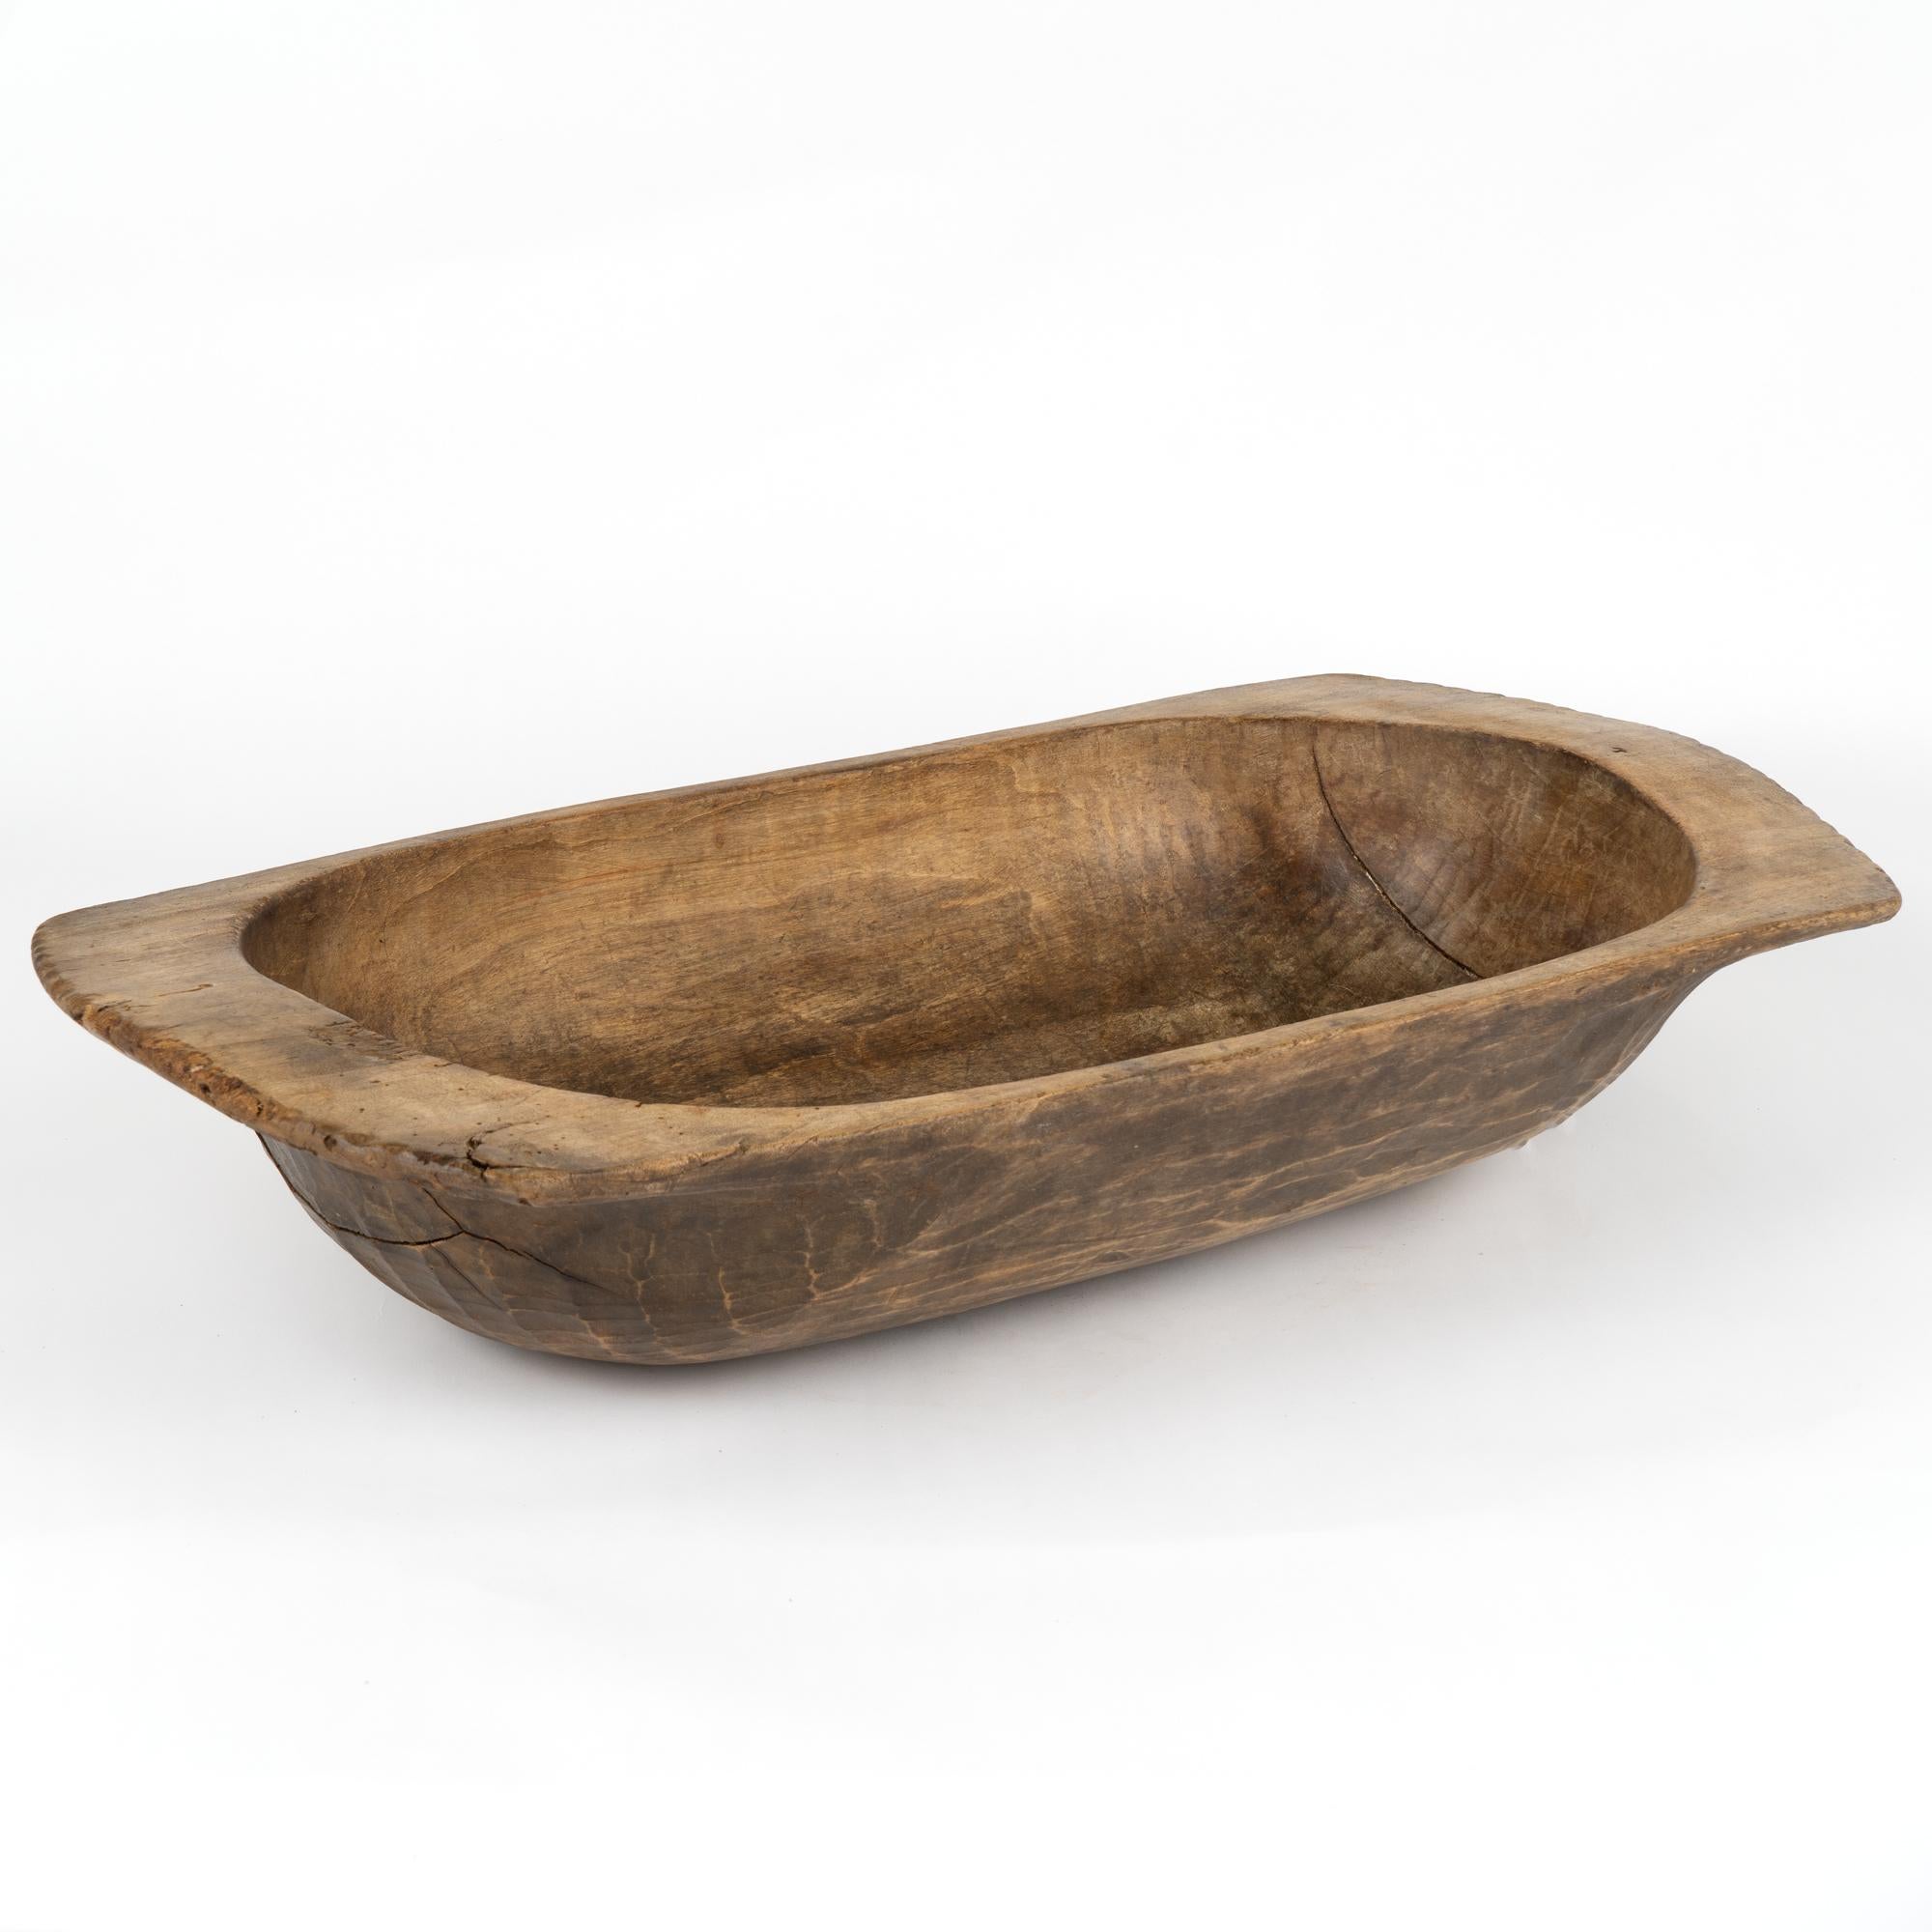 Antique hand hewn, European country dough bowl / trencher featuring a rounded rectangular shape, tapered base and handles.
Old cracks/nicks, stains reflective of generations of use. Waxed, solid, stable and ready to be used as decorative bowl.

With